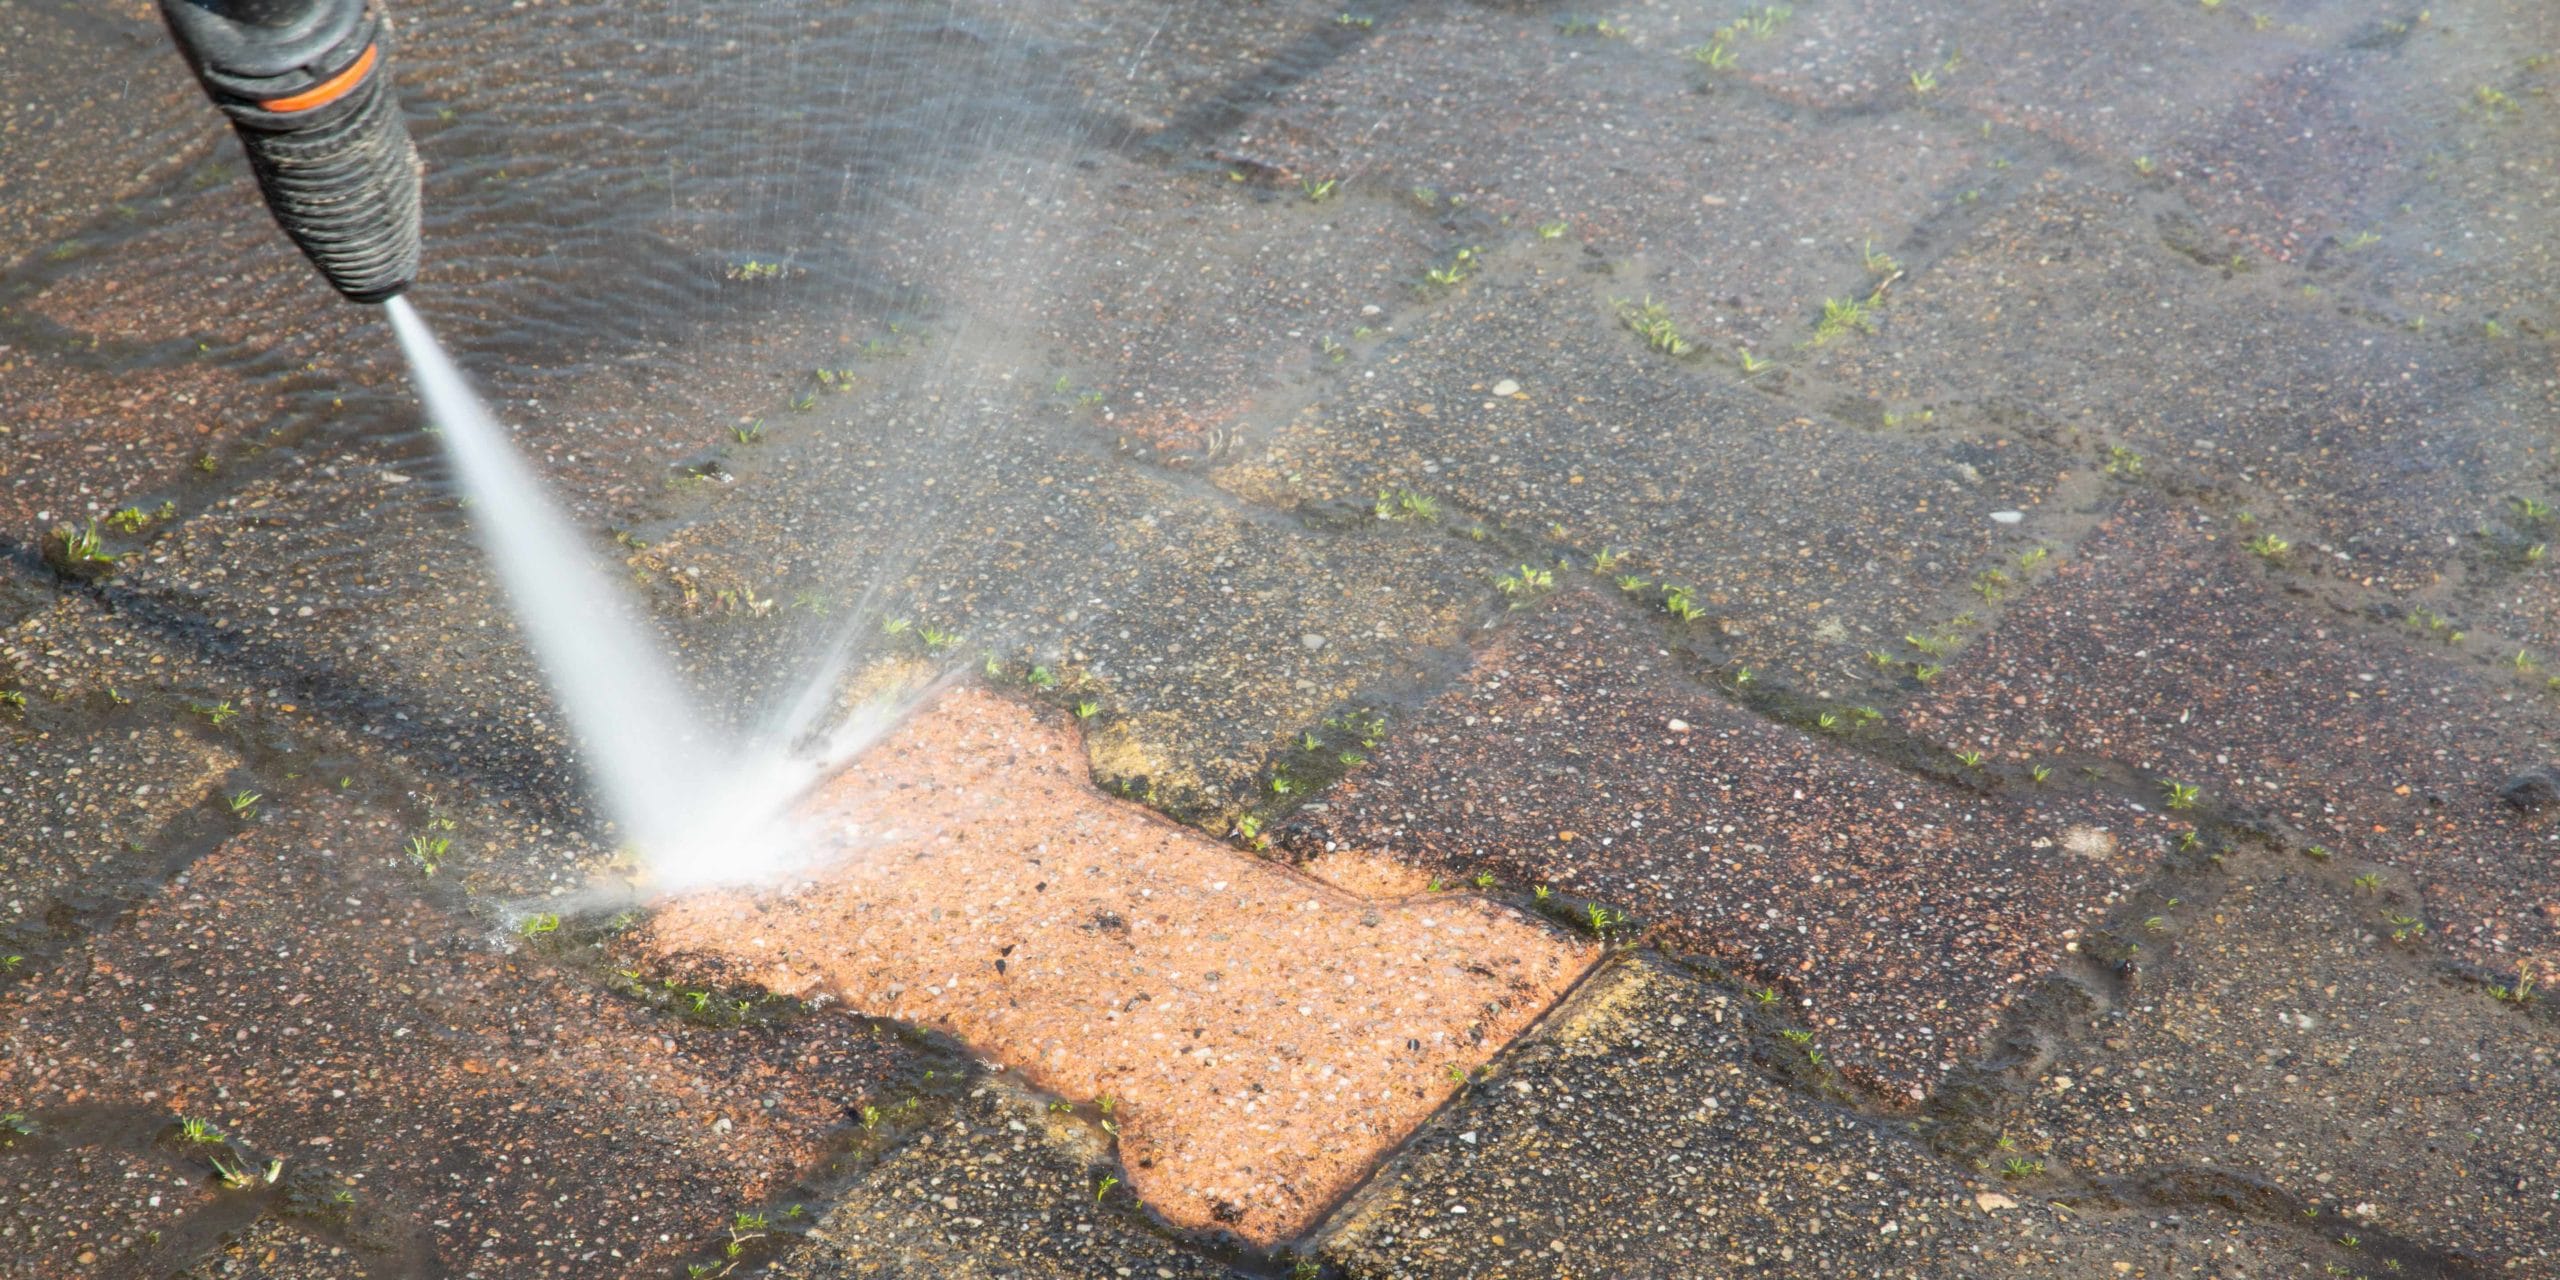 Pressure Washing Services in Cleveland TX